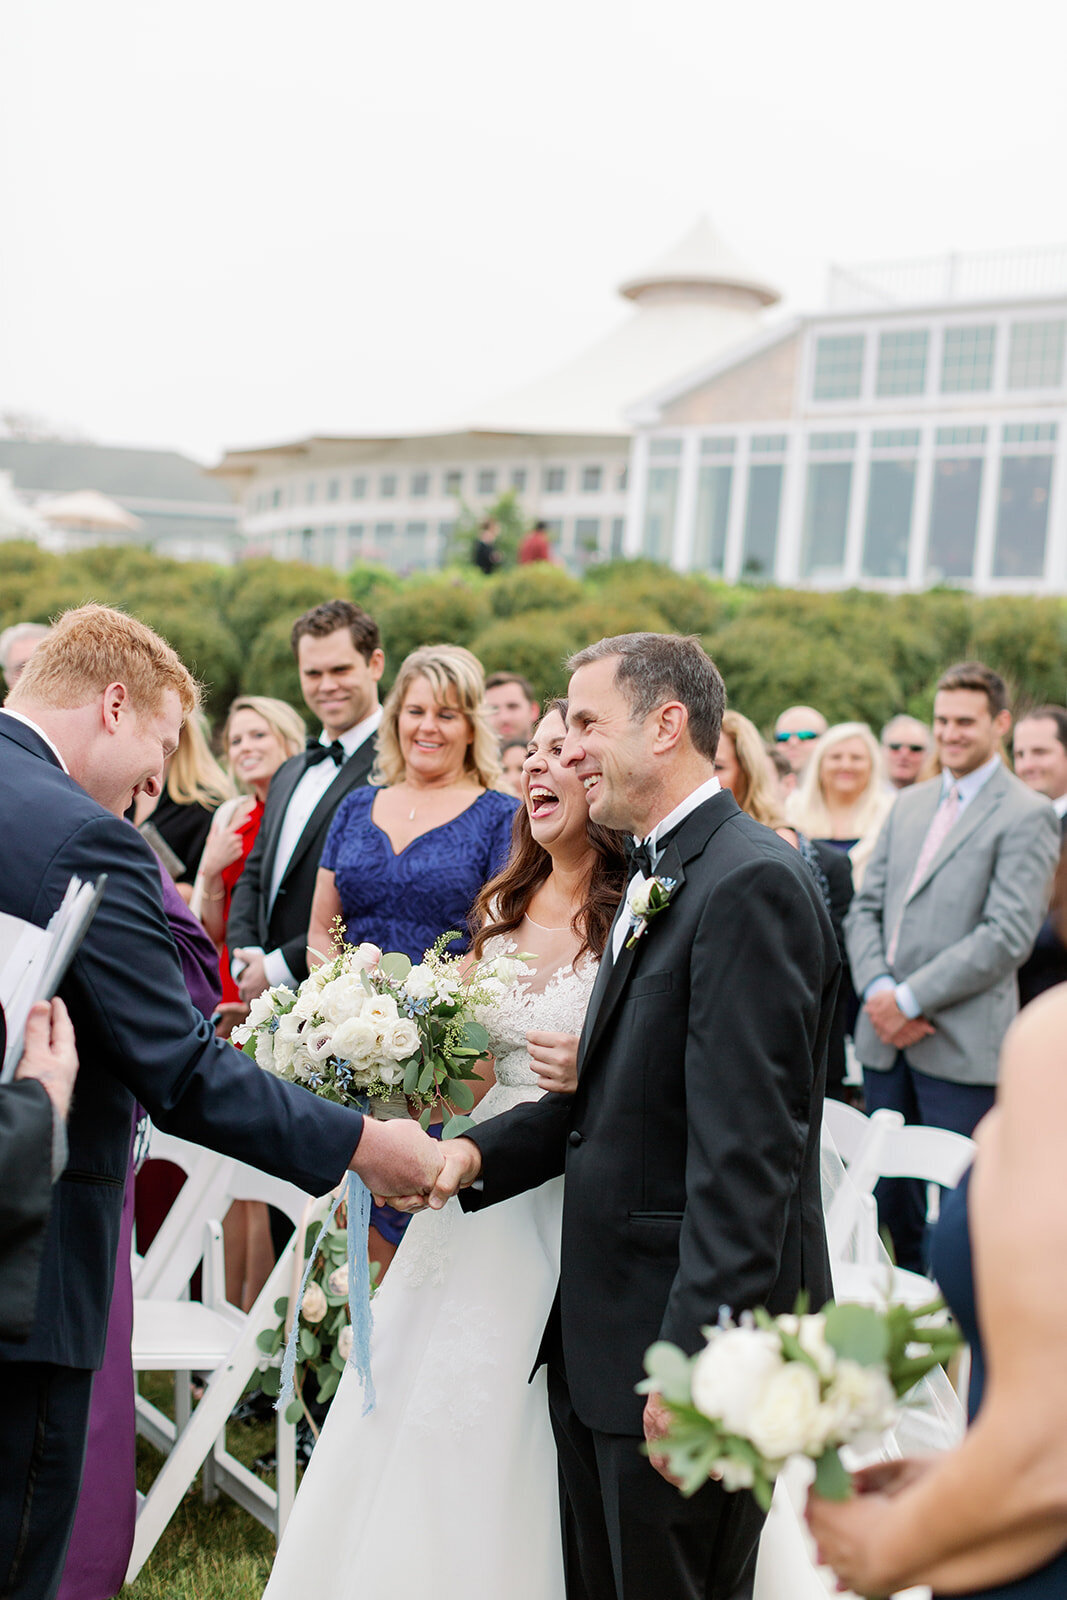 Man shaking a grooms hand as a bride laughs next to them